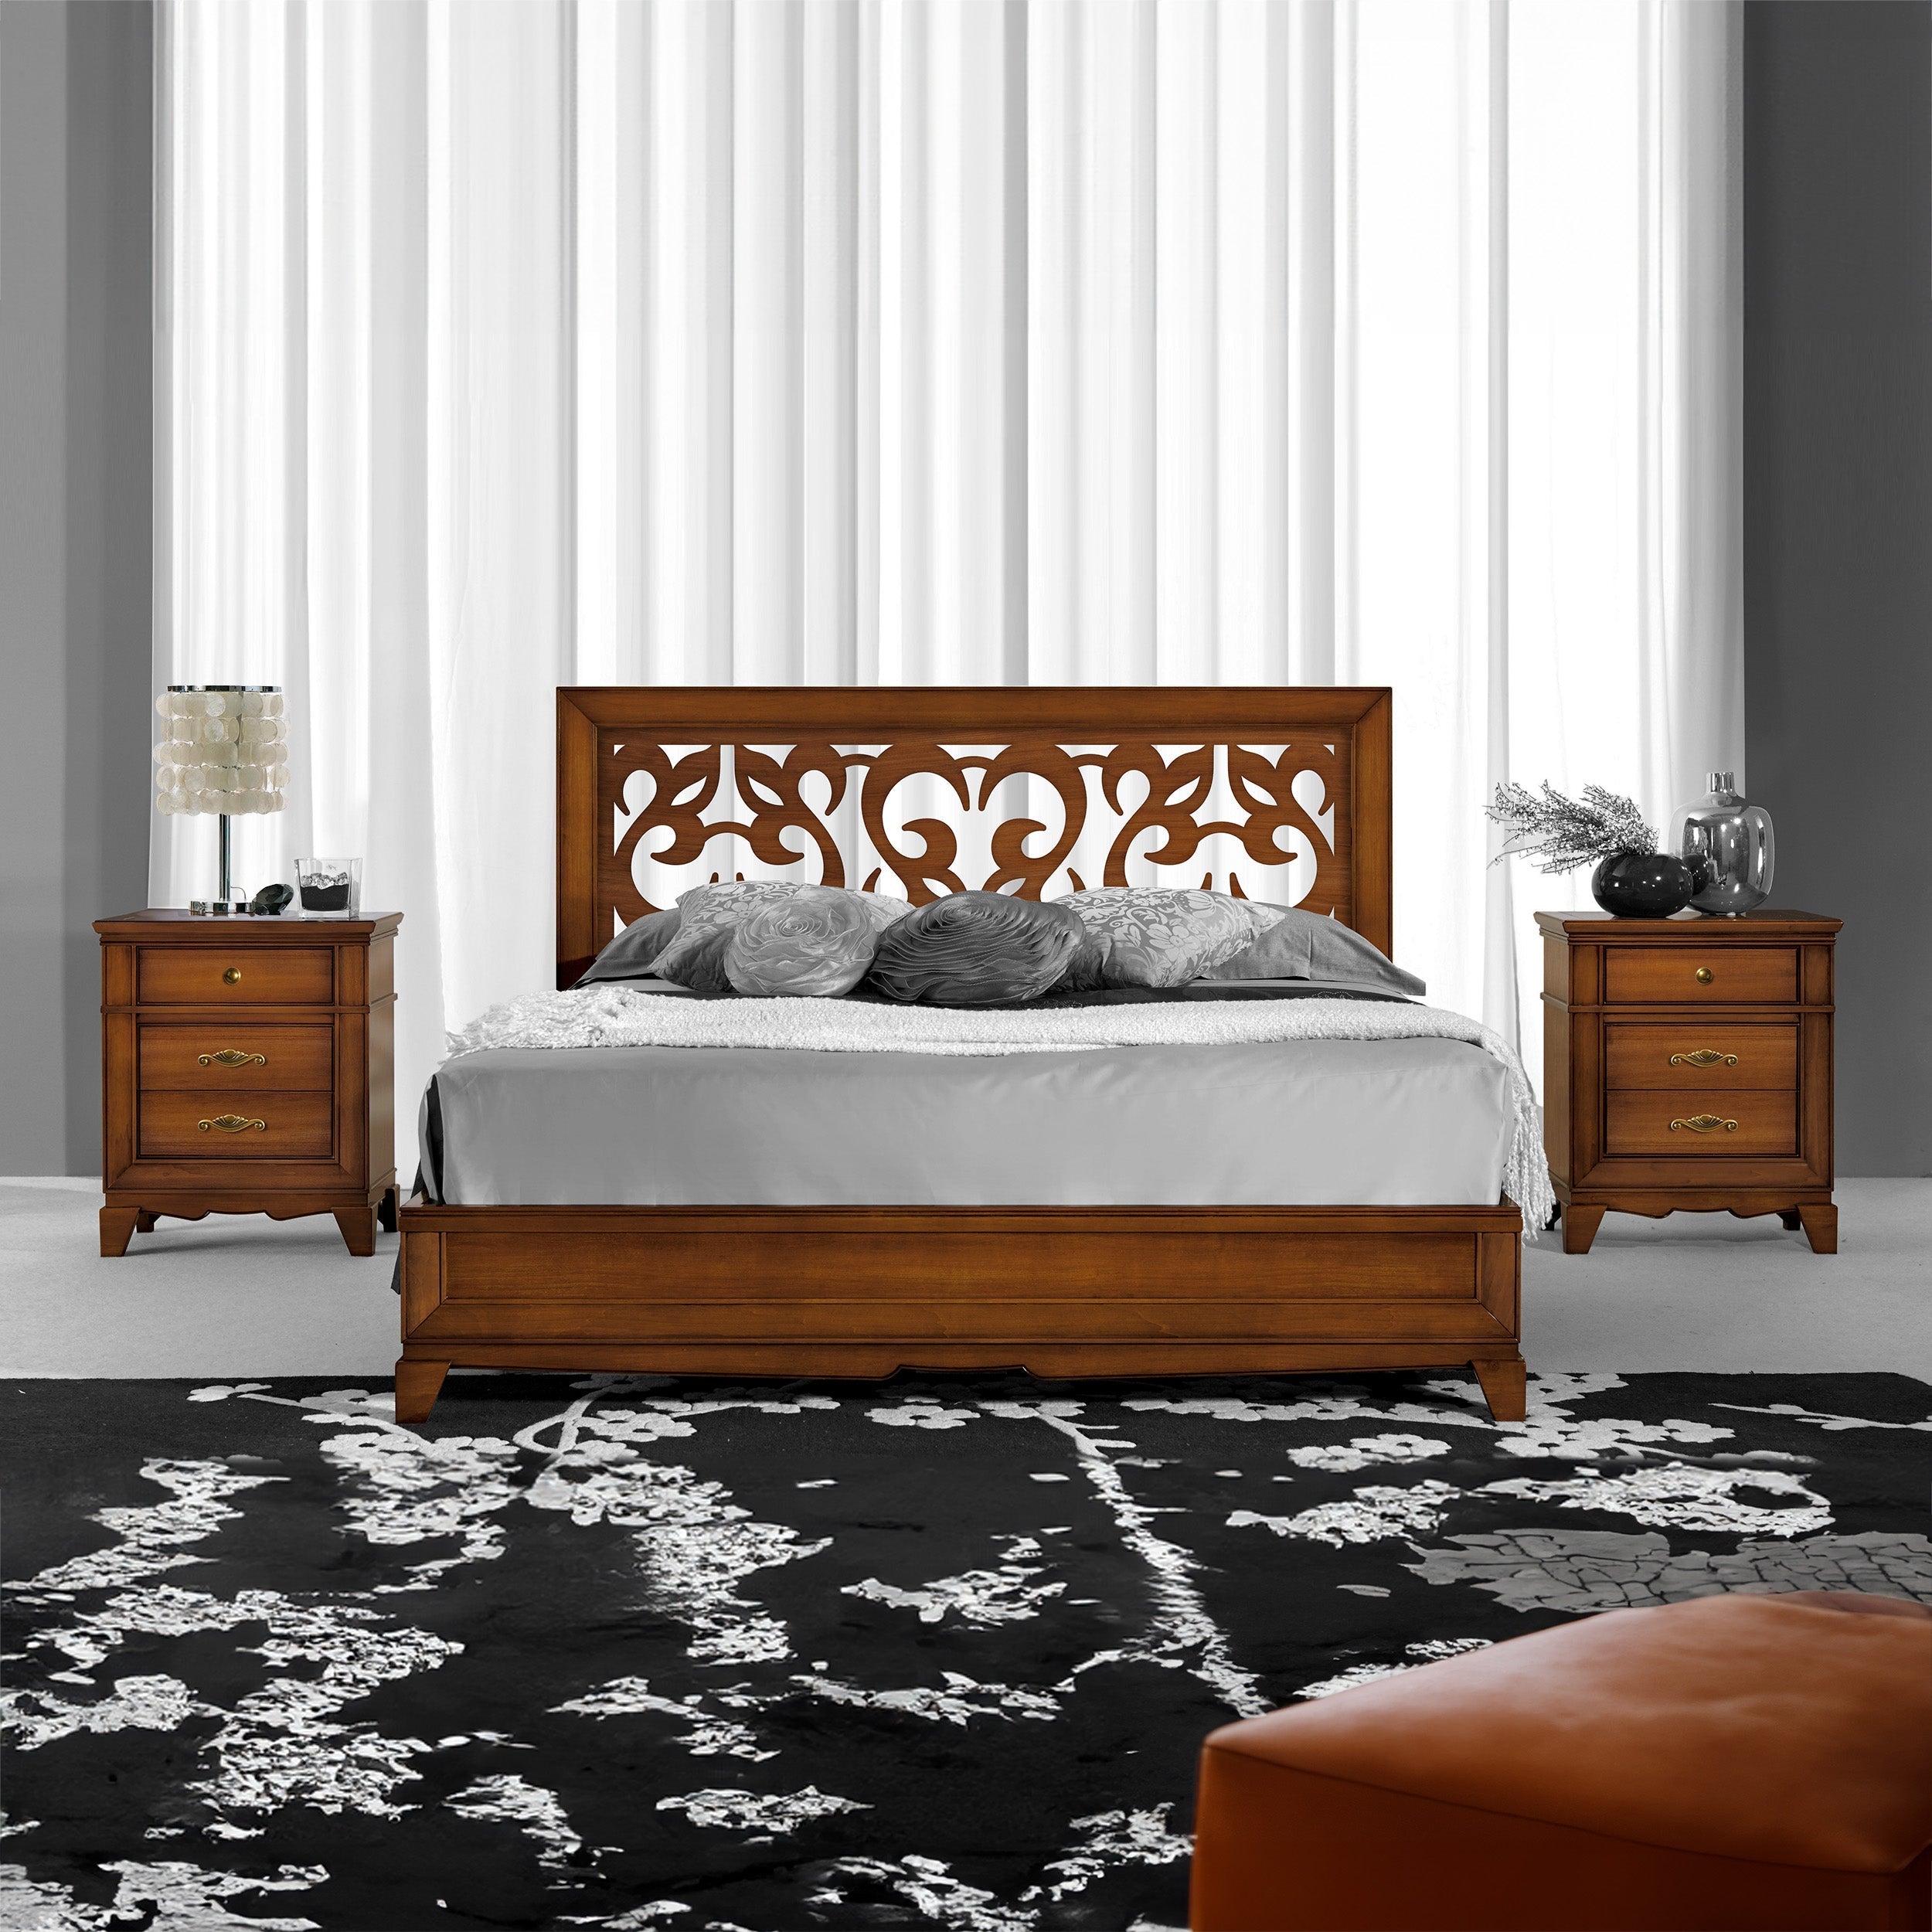 Classic KING SIZE Double Bed in Wood with Storage Box Perforated Headboard L 194 D 211 cm Arte D'Este Piombini Collection